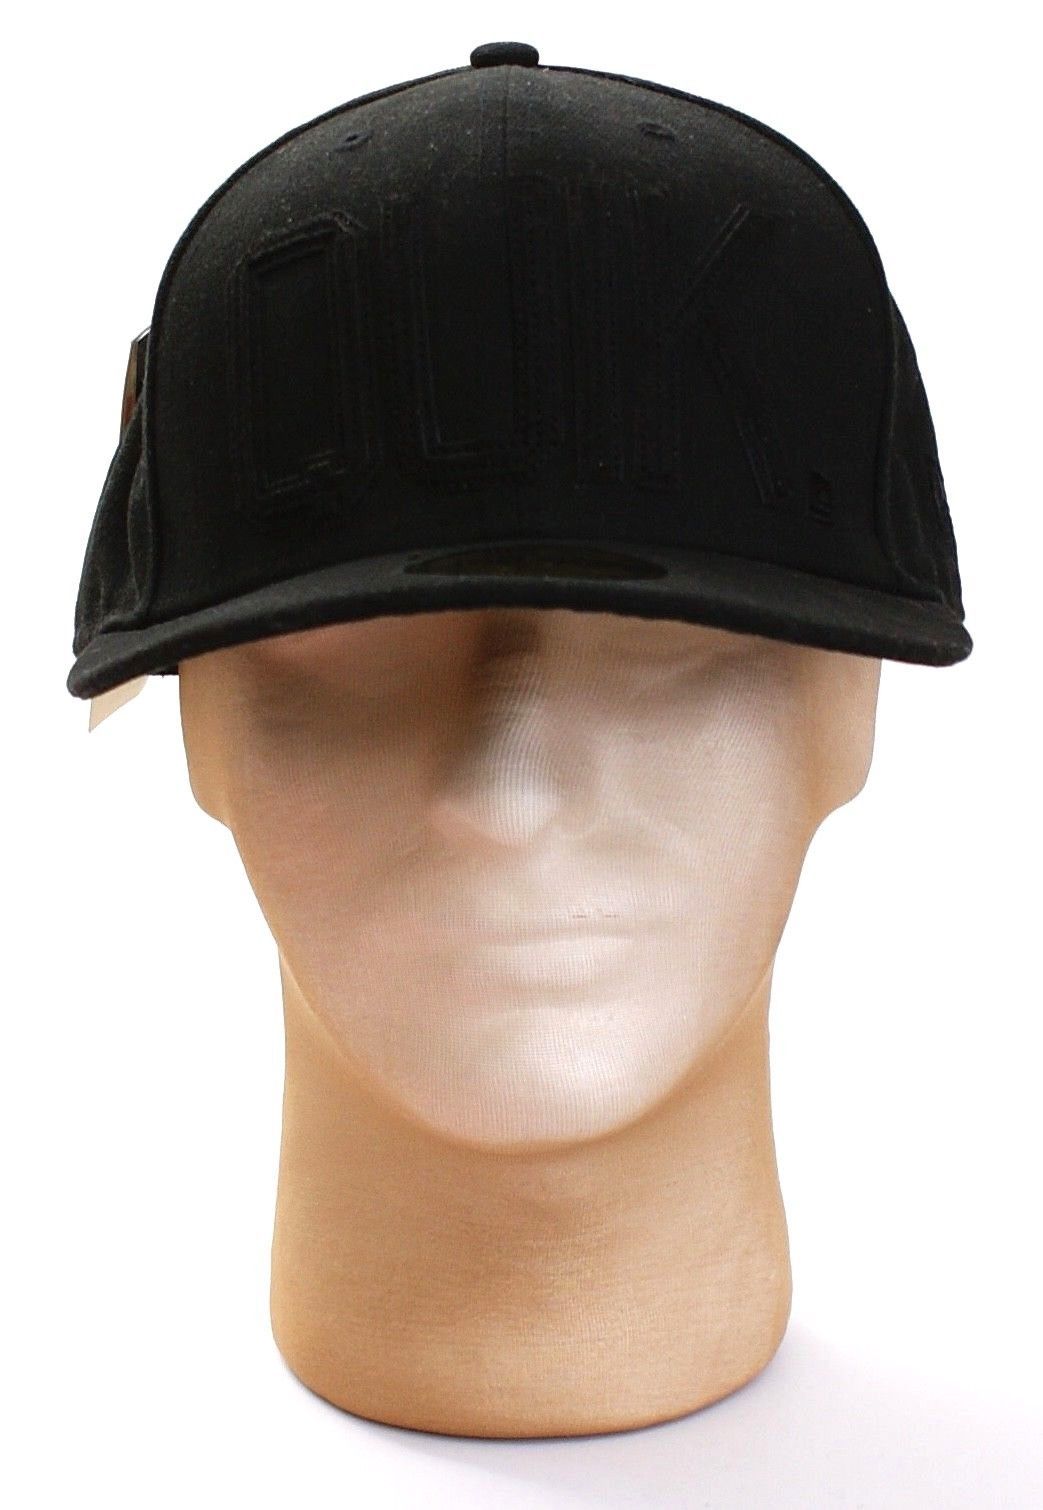 New Era 59Fifty Quiksilver Signature Double Stack Black Fitted Hat Cap Adult NWT - $49.99